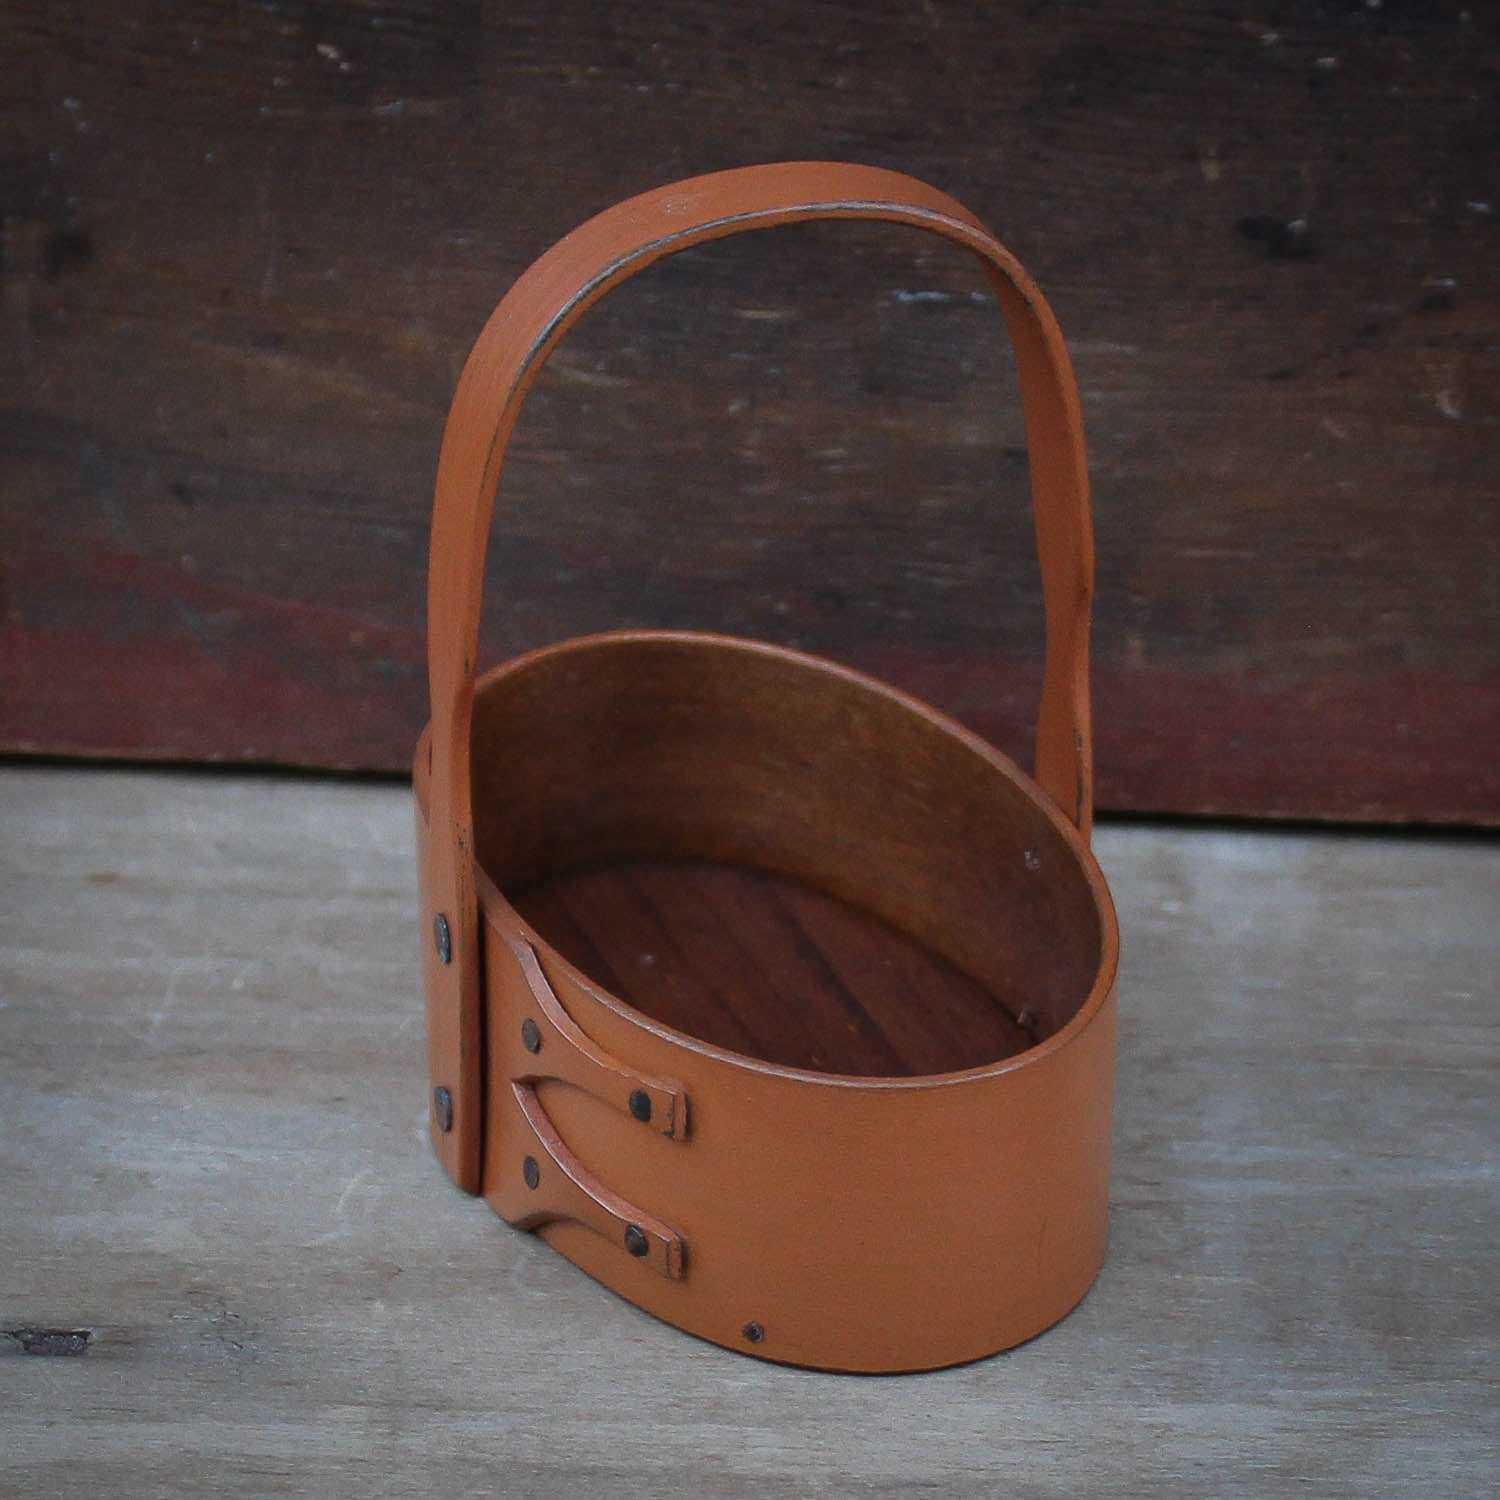 Shaker Carrier, Size #0, LeHays Shaker Boxes, Handcrafted in Maine.  Pumpkin Milk Paint Finish, Side View